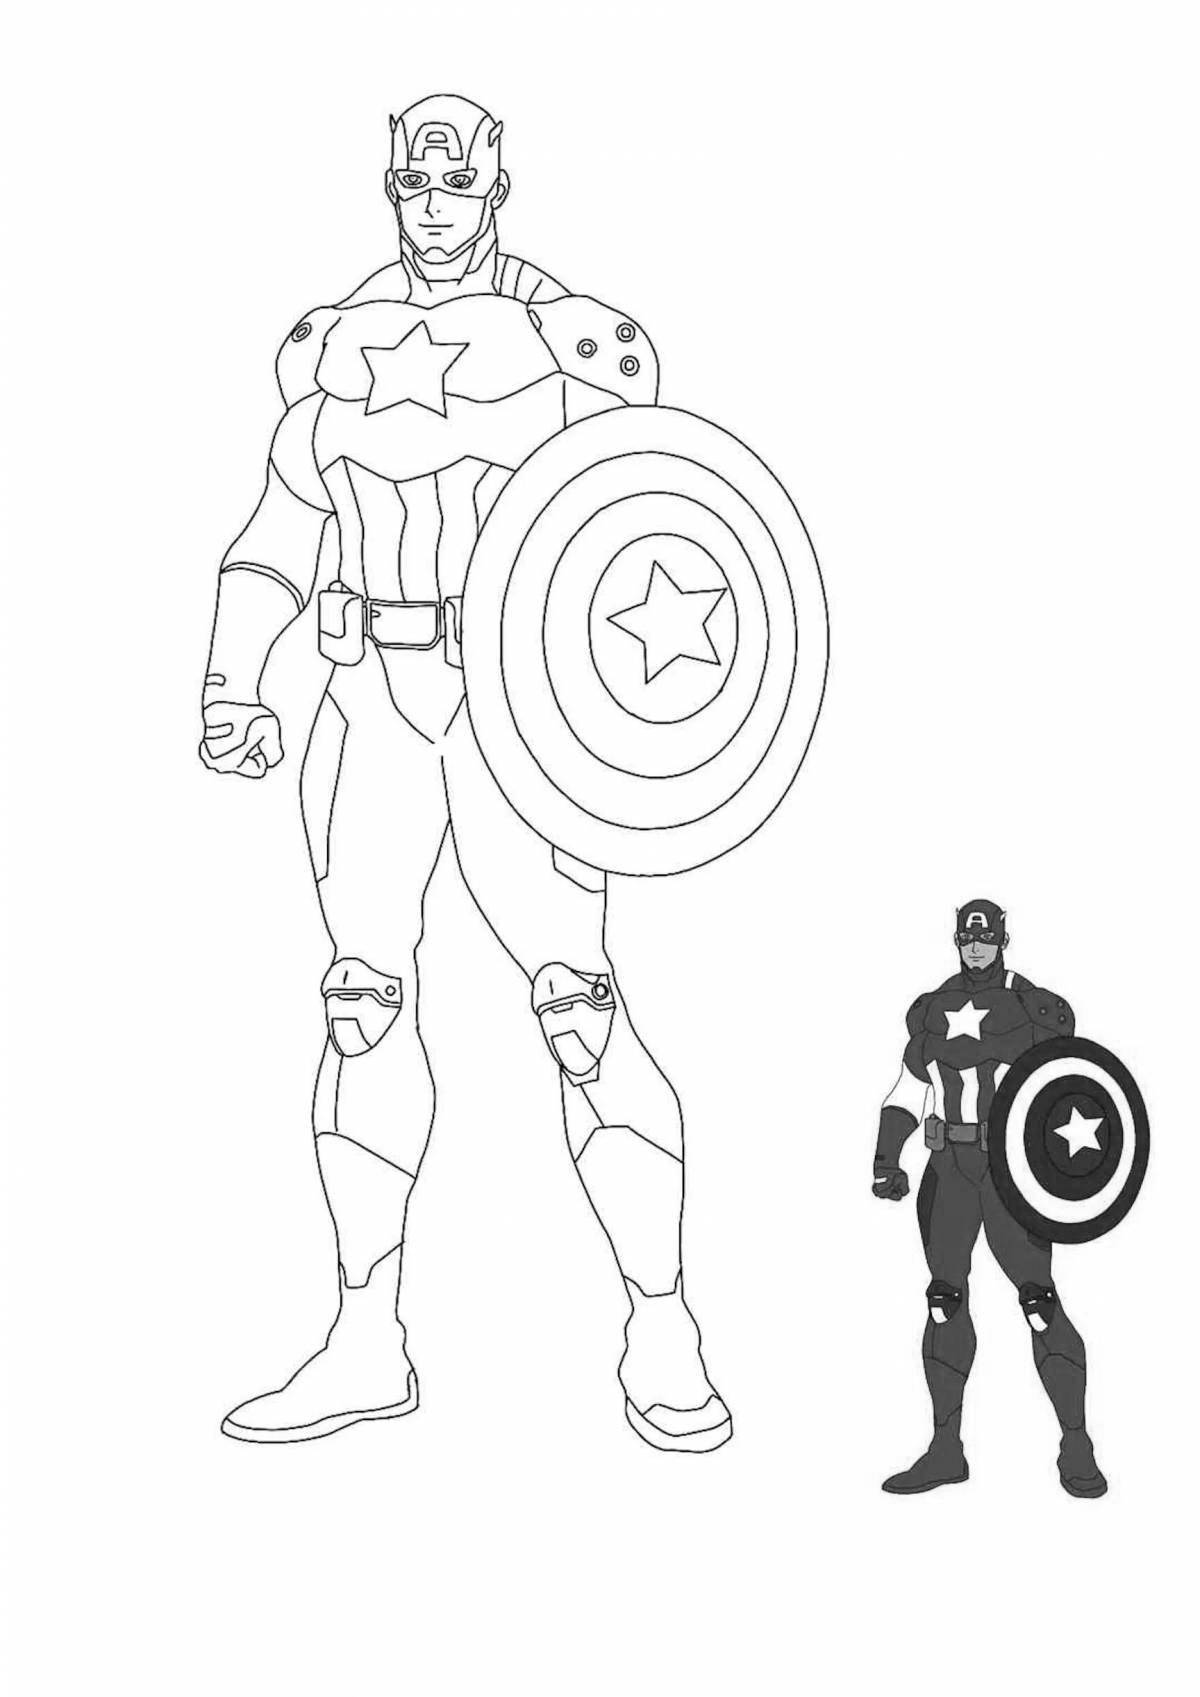 Captain america colorful coloring book for boys